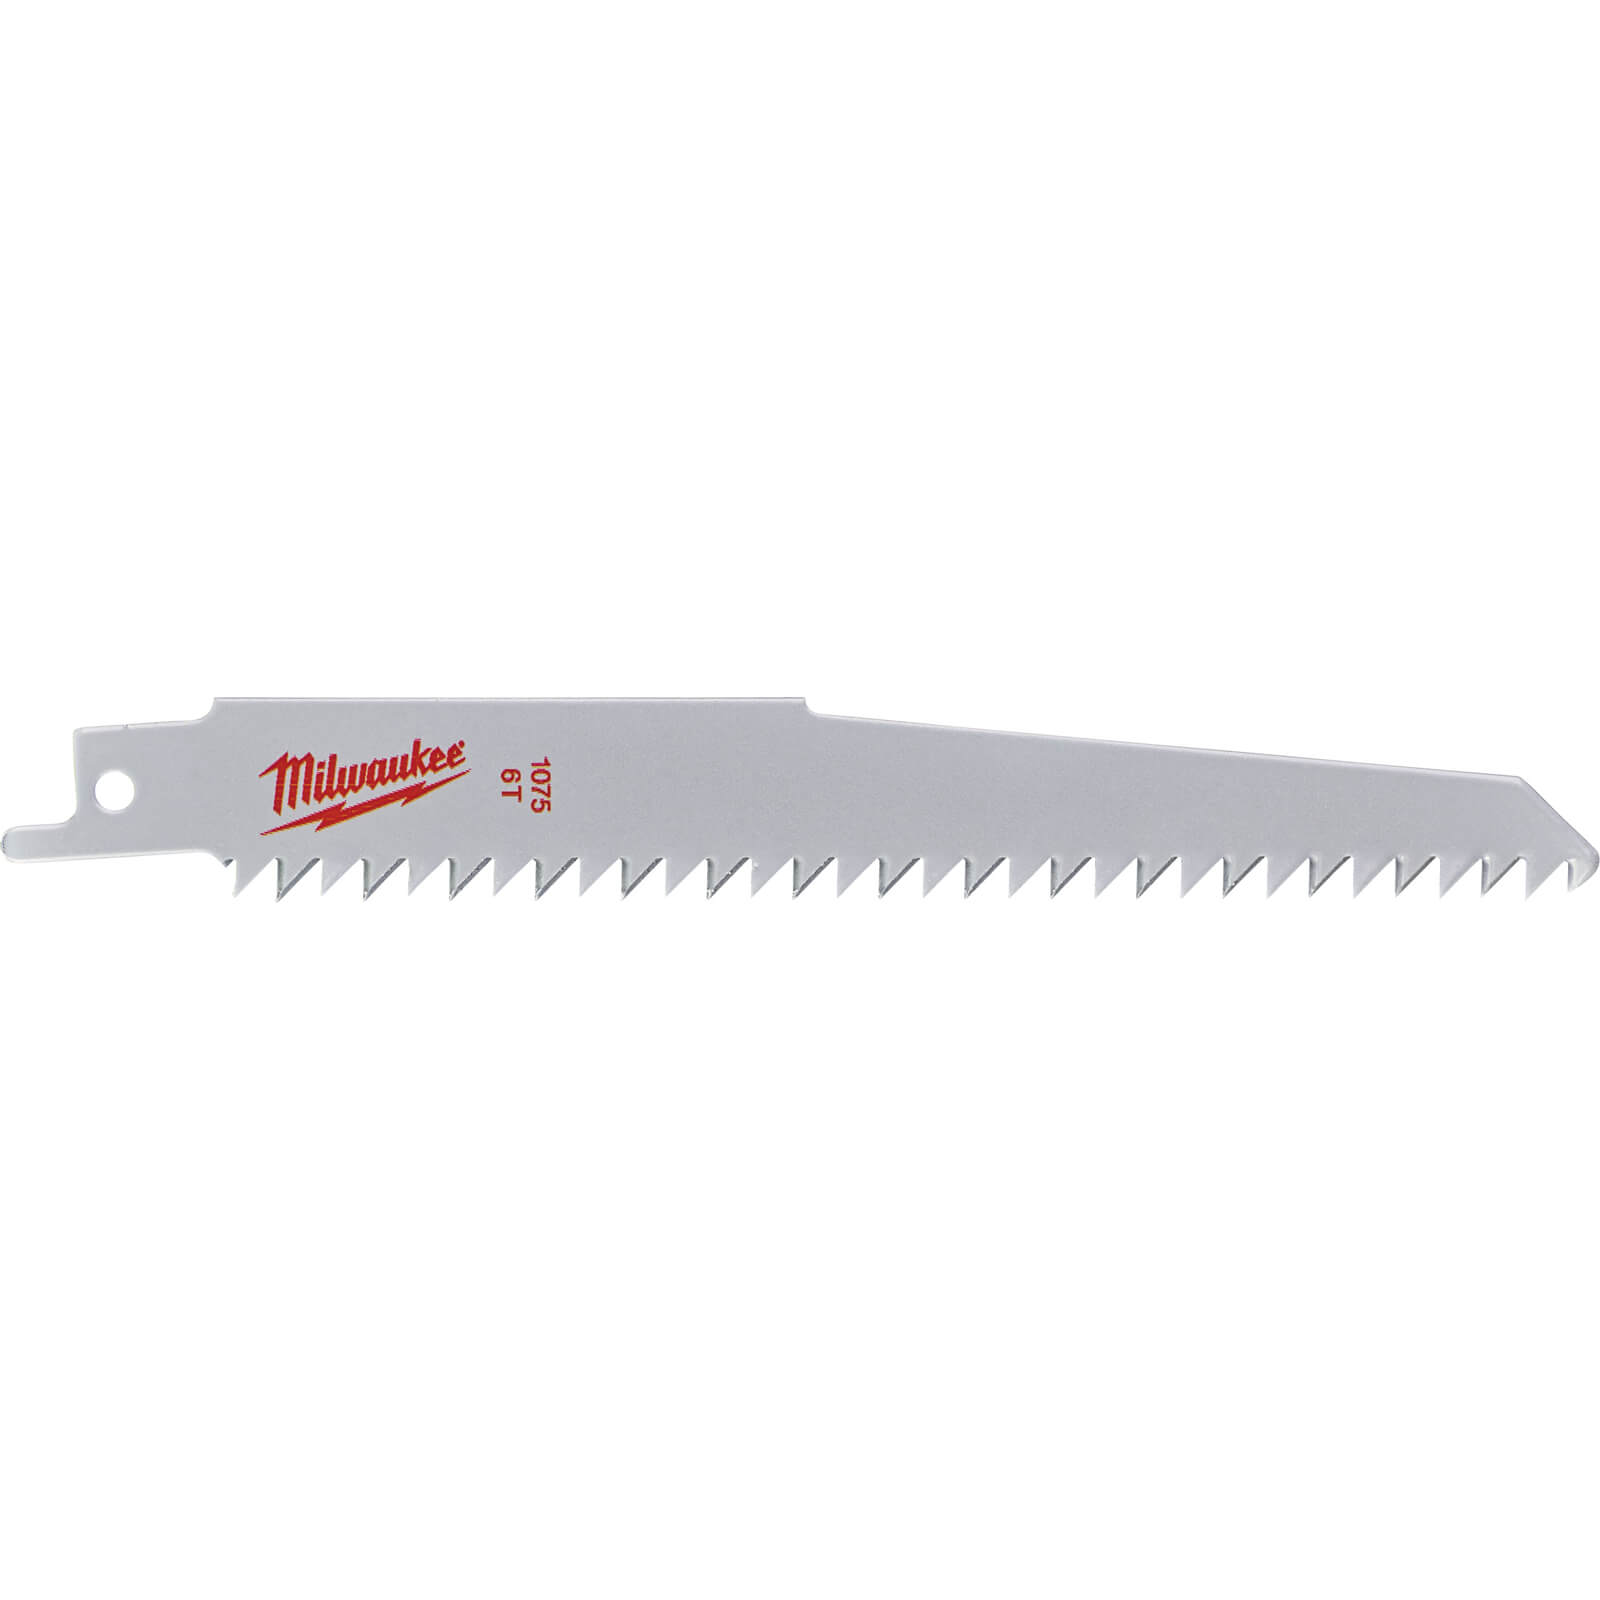 Photos - Power Tool Accessory Milwaukee S644D Wood and Plastic Saw Blades 150mm Pack of 3 48001075 